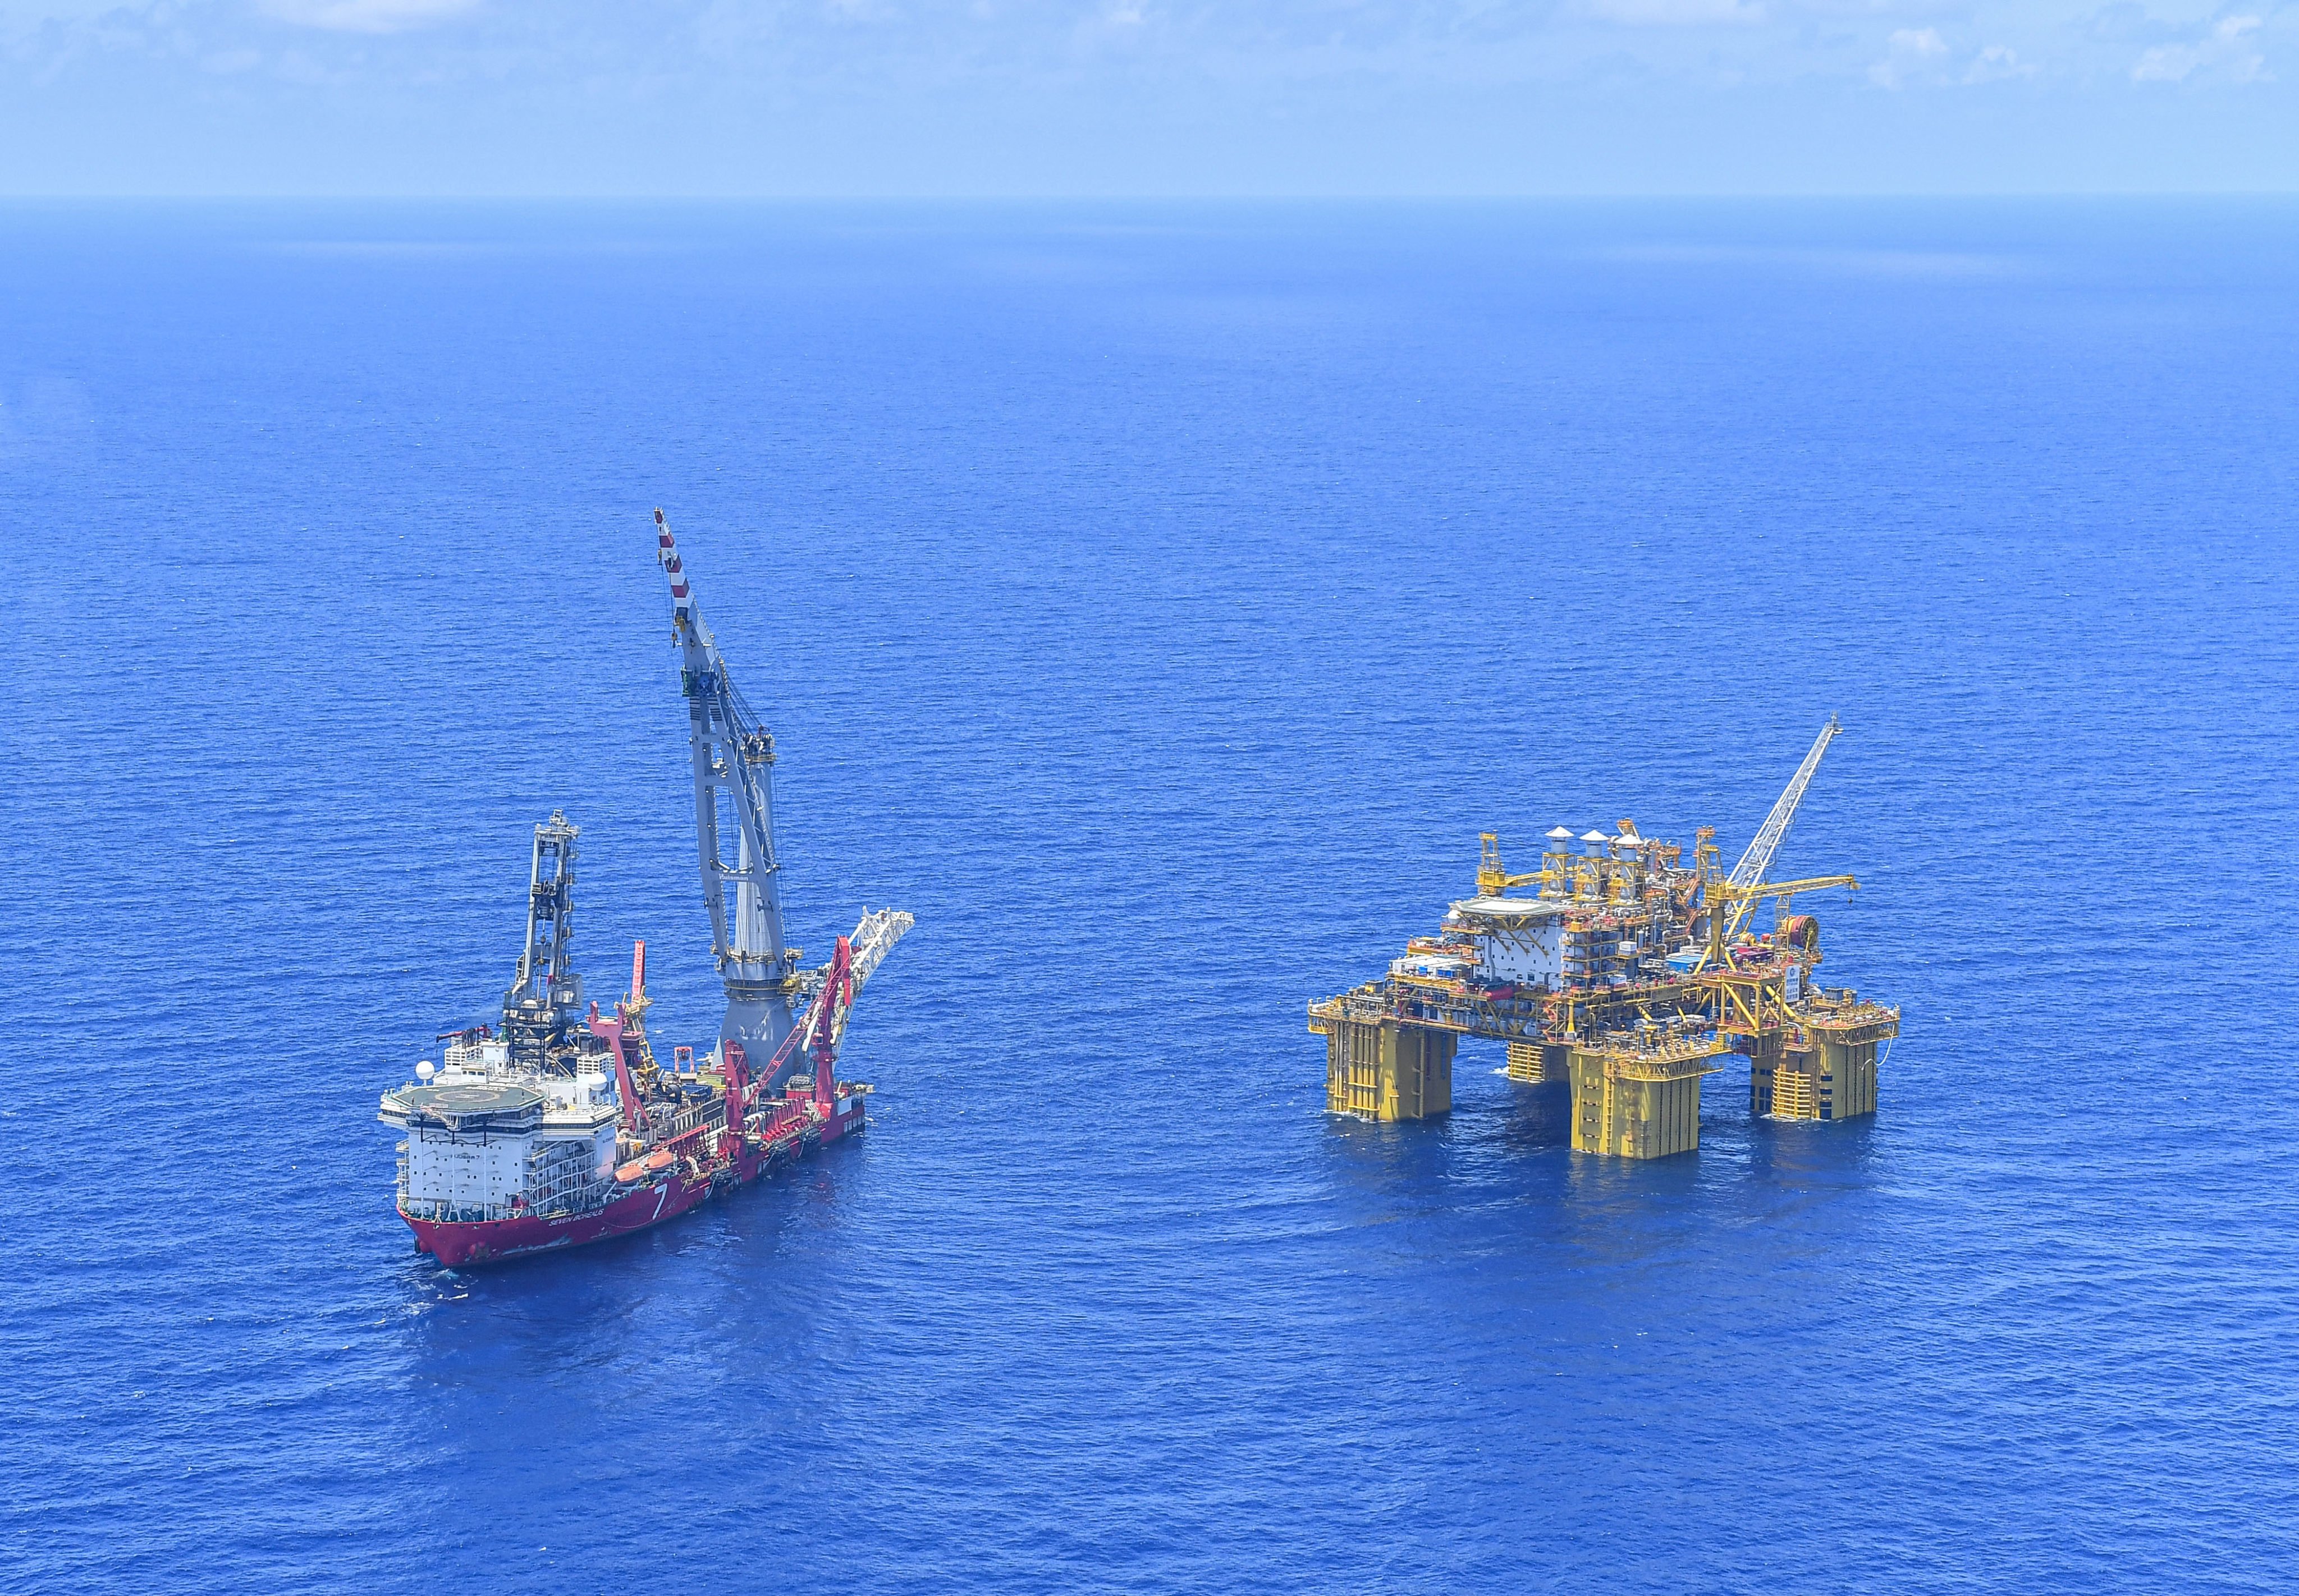 A Chinese deepwater drilling rig in the South China Sea. Photo: Xinhua